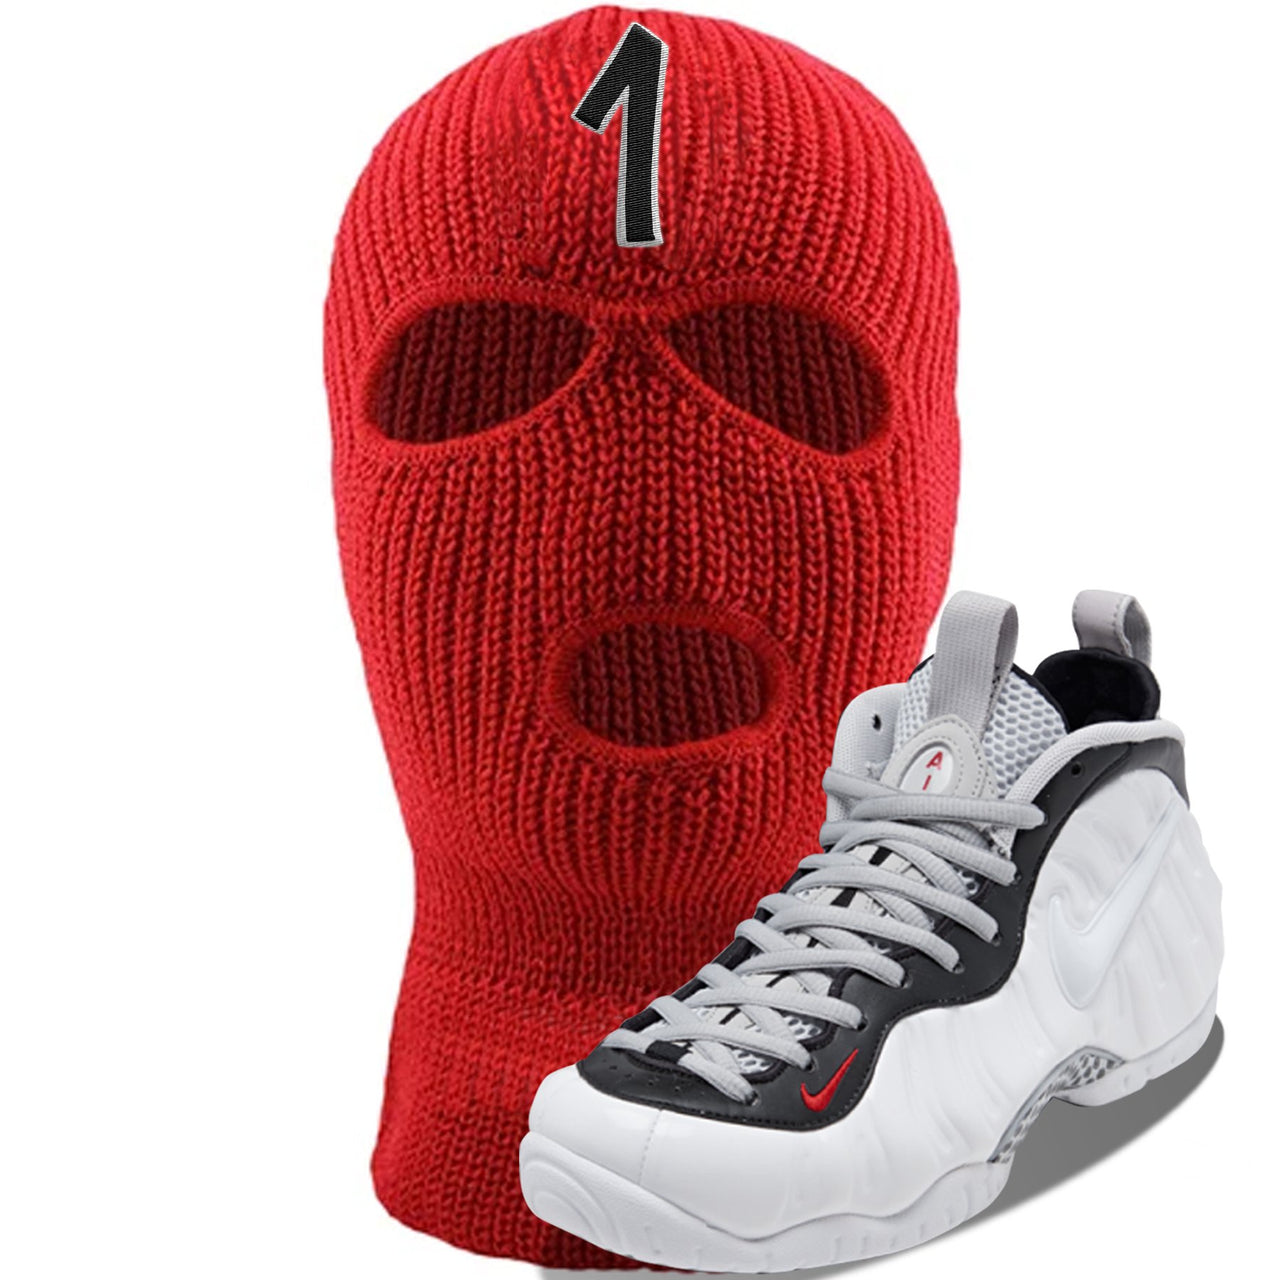 Foamposite Pro White Black University Red Sneaker Red Ski Mask | Winter Mask to match Nike Air Foamposite Pro White Black University Red Shoes | Penny One